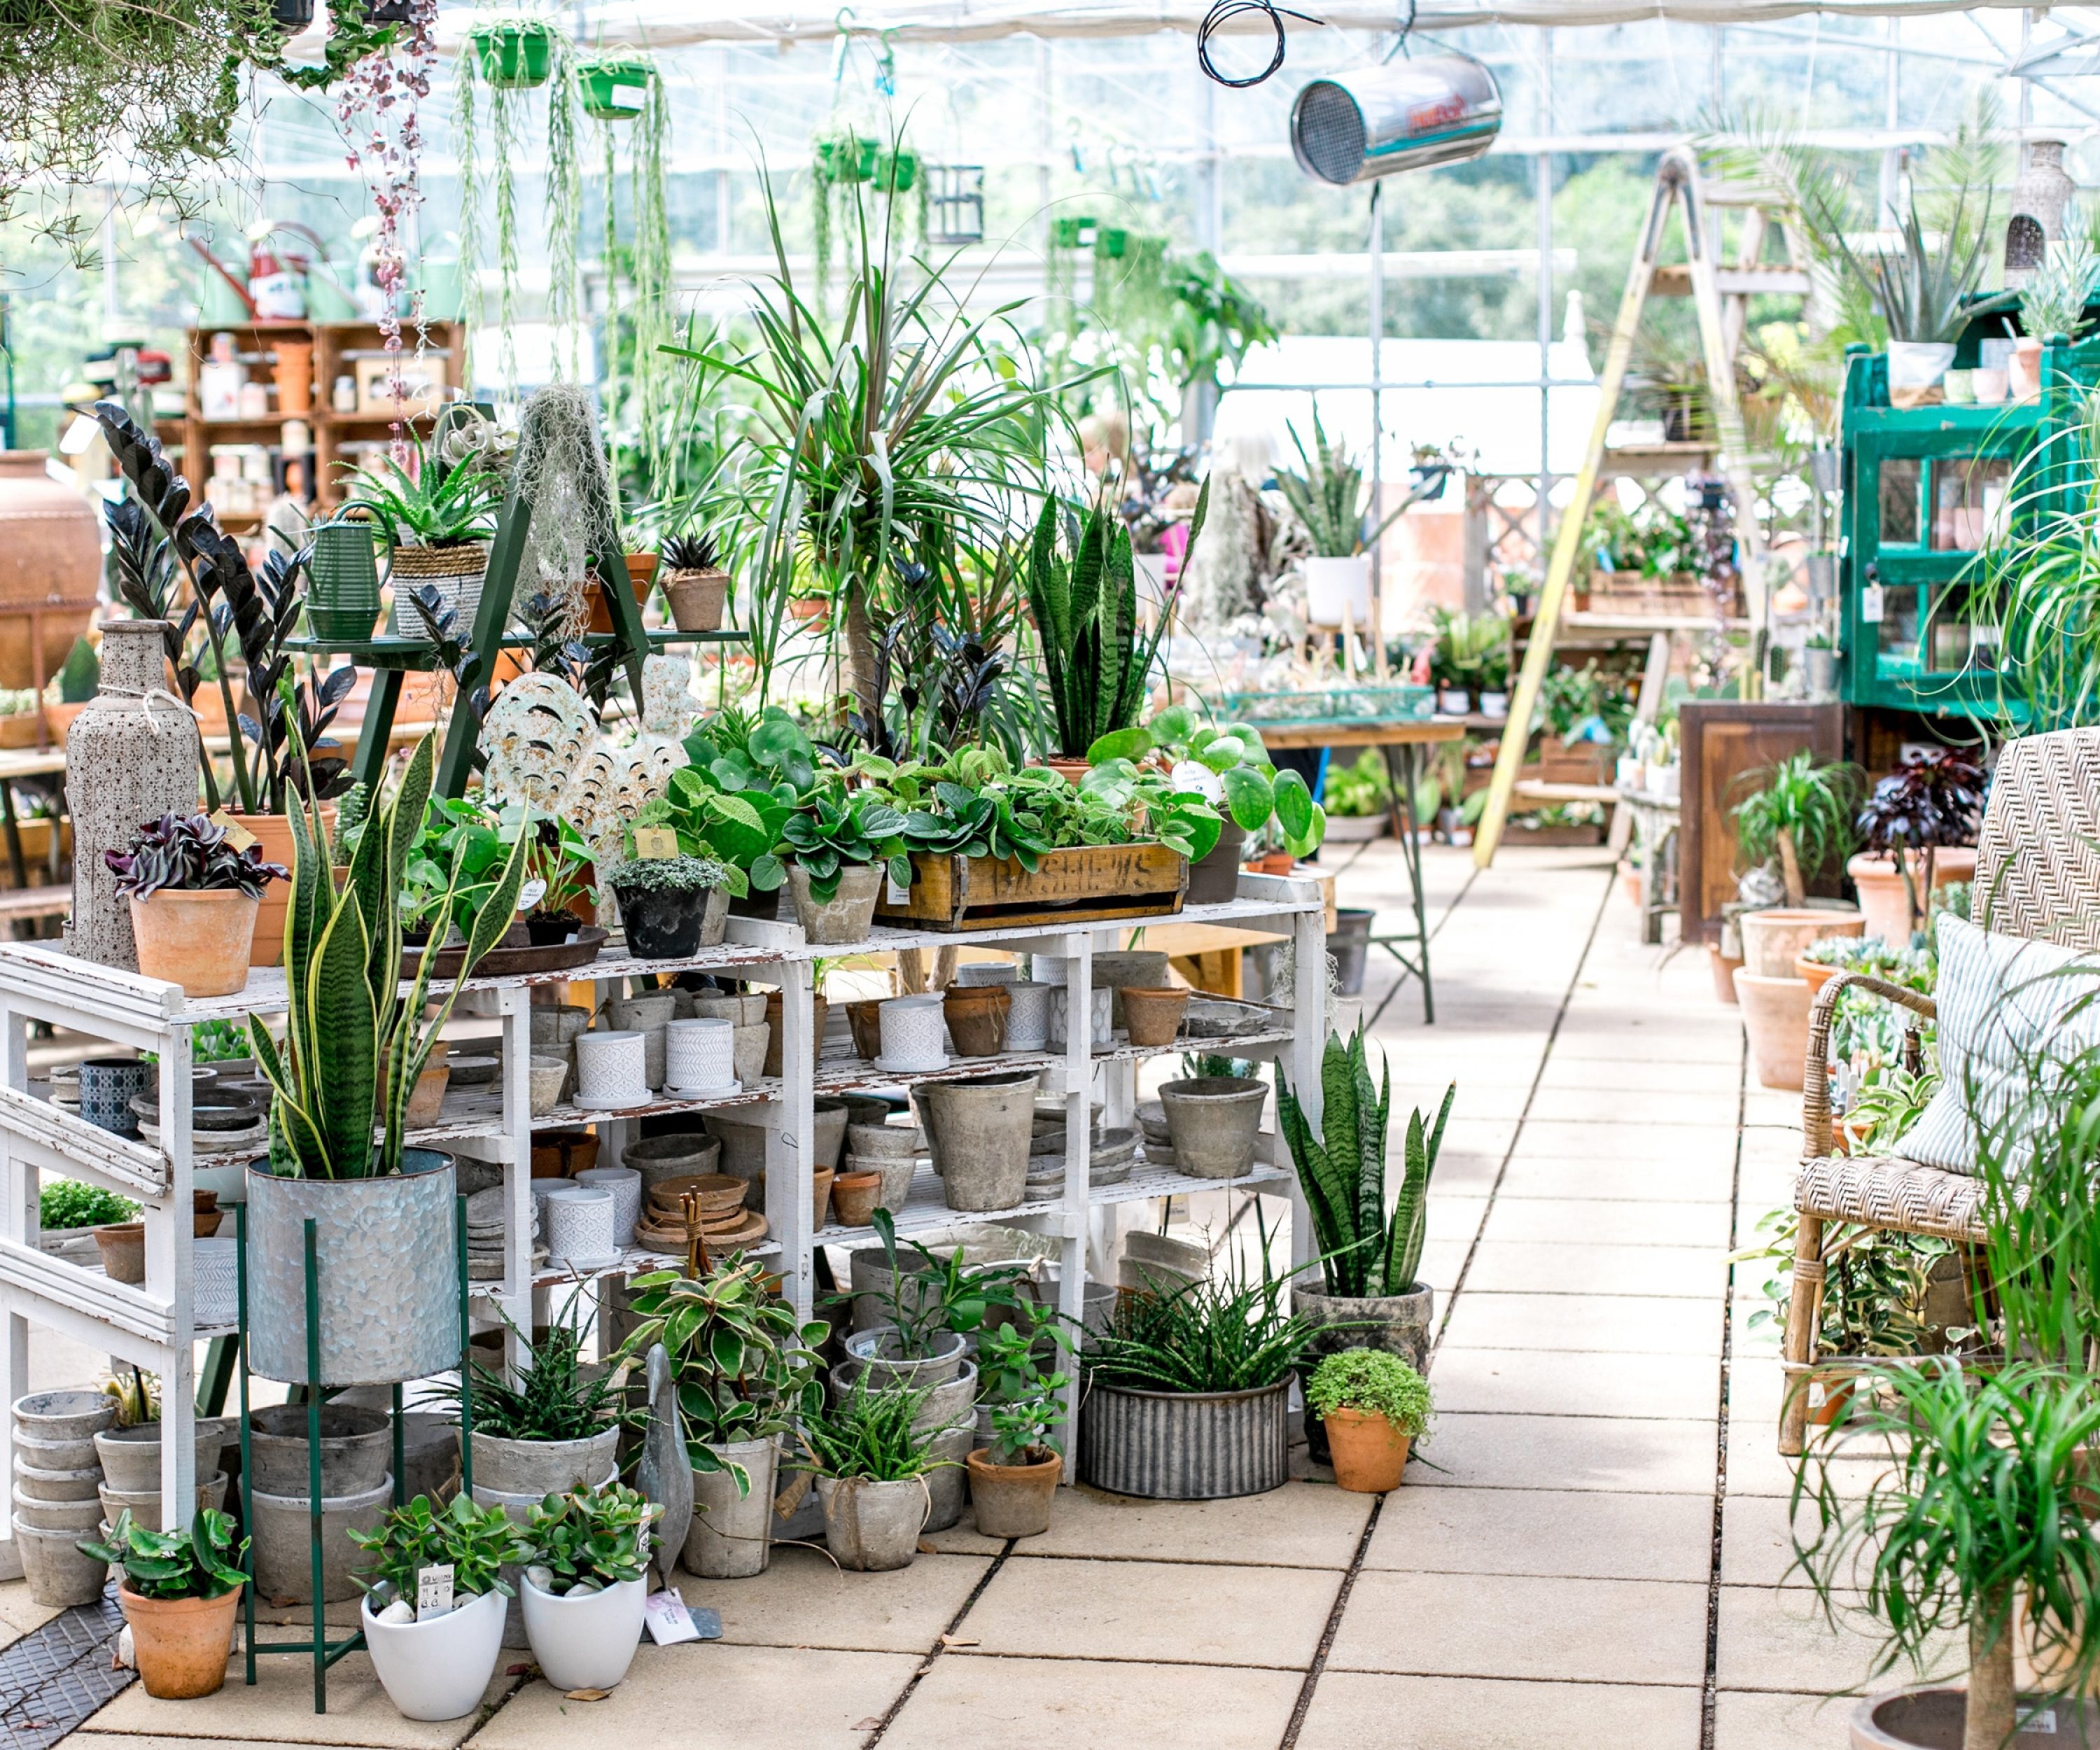 Bright indoor area with a collection of indoor plants at the Duchy nursery.